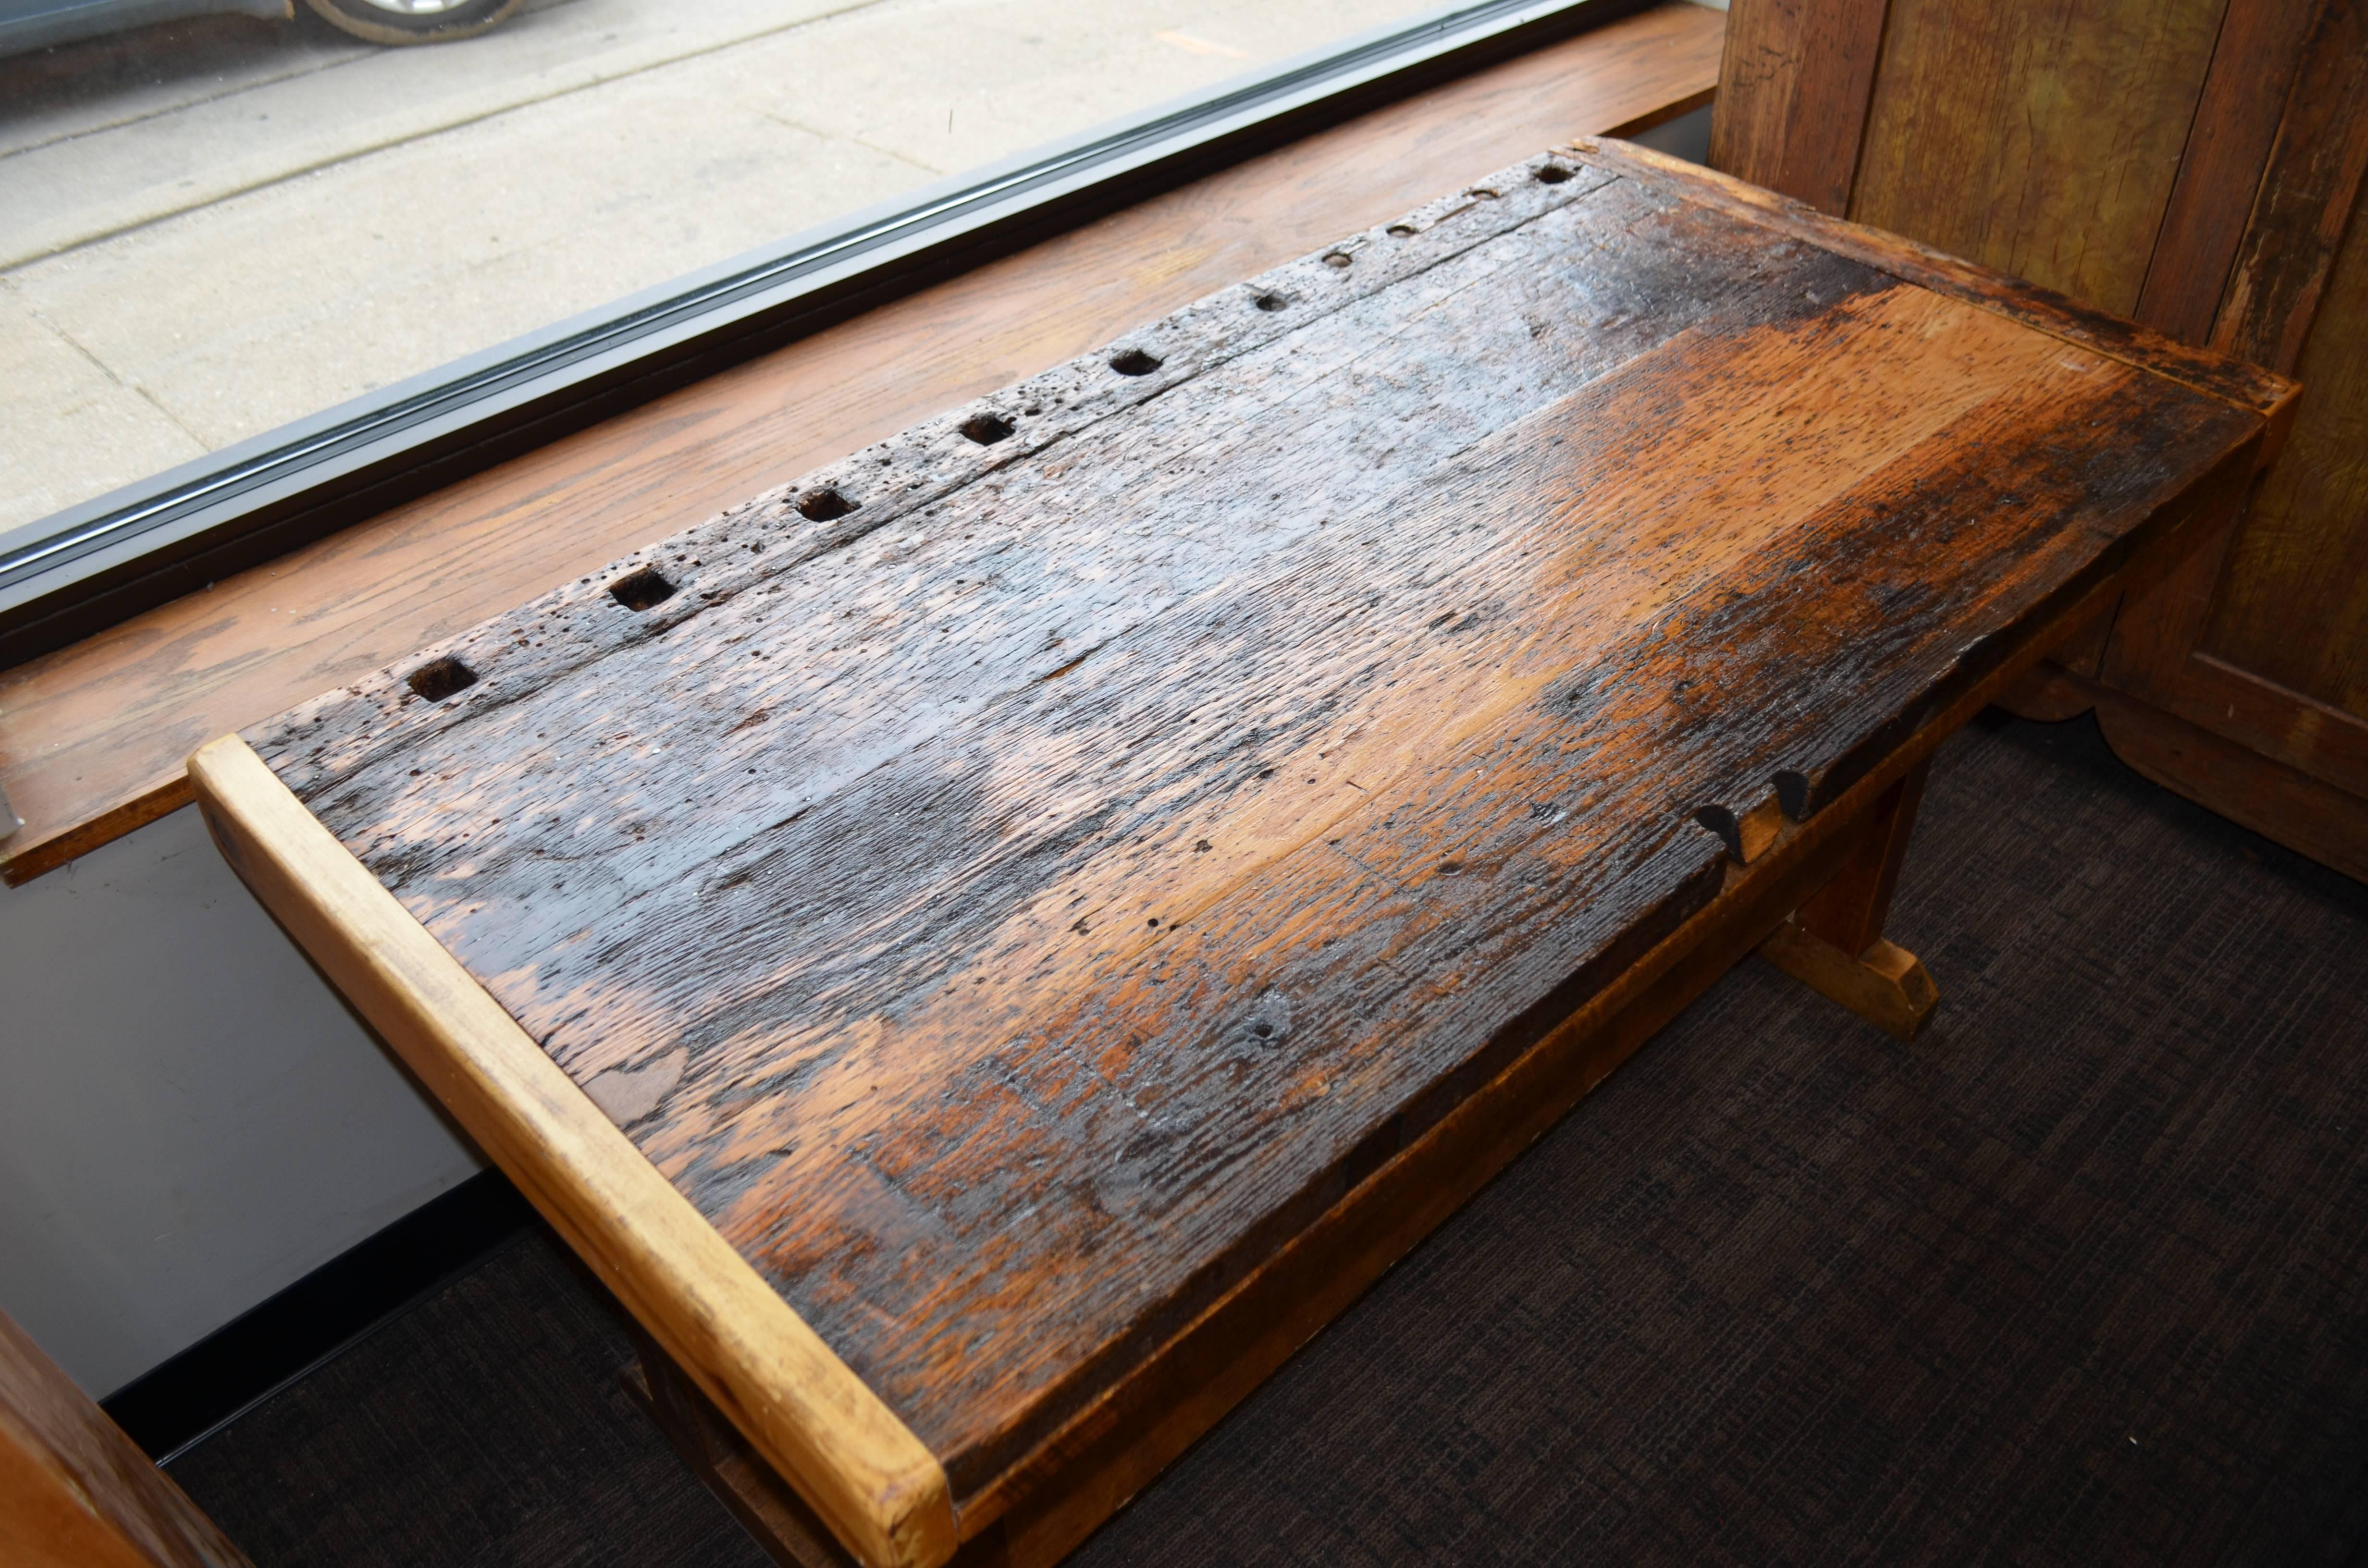 Late 19th century, primitive wooden workbench with character, sturdiness and wonderful patina of use and wear. Side board, left-facing has been replaced. All other elements are original. Bench has been cleaned and sealed. Add a shelf beneath and